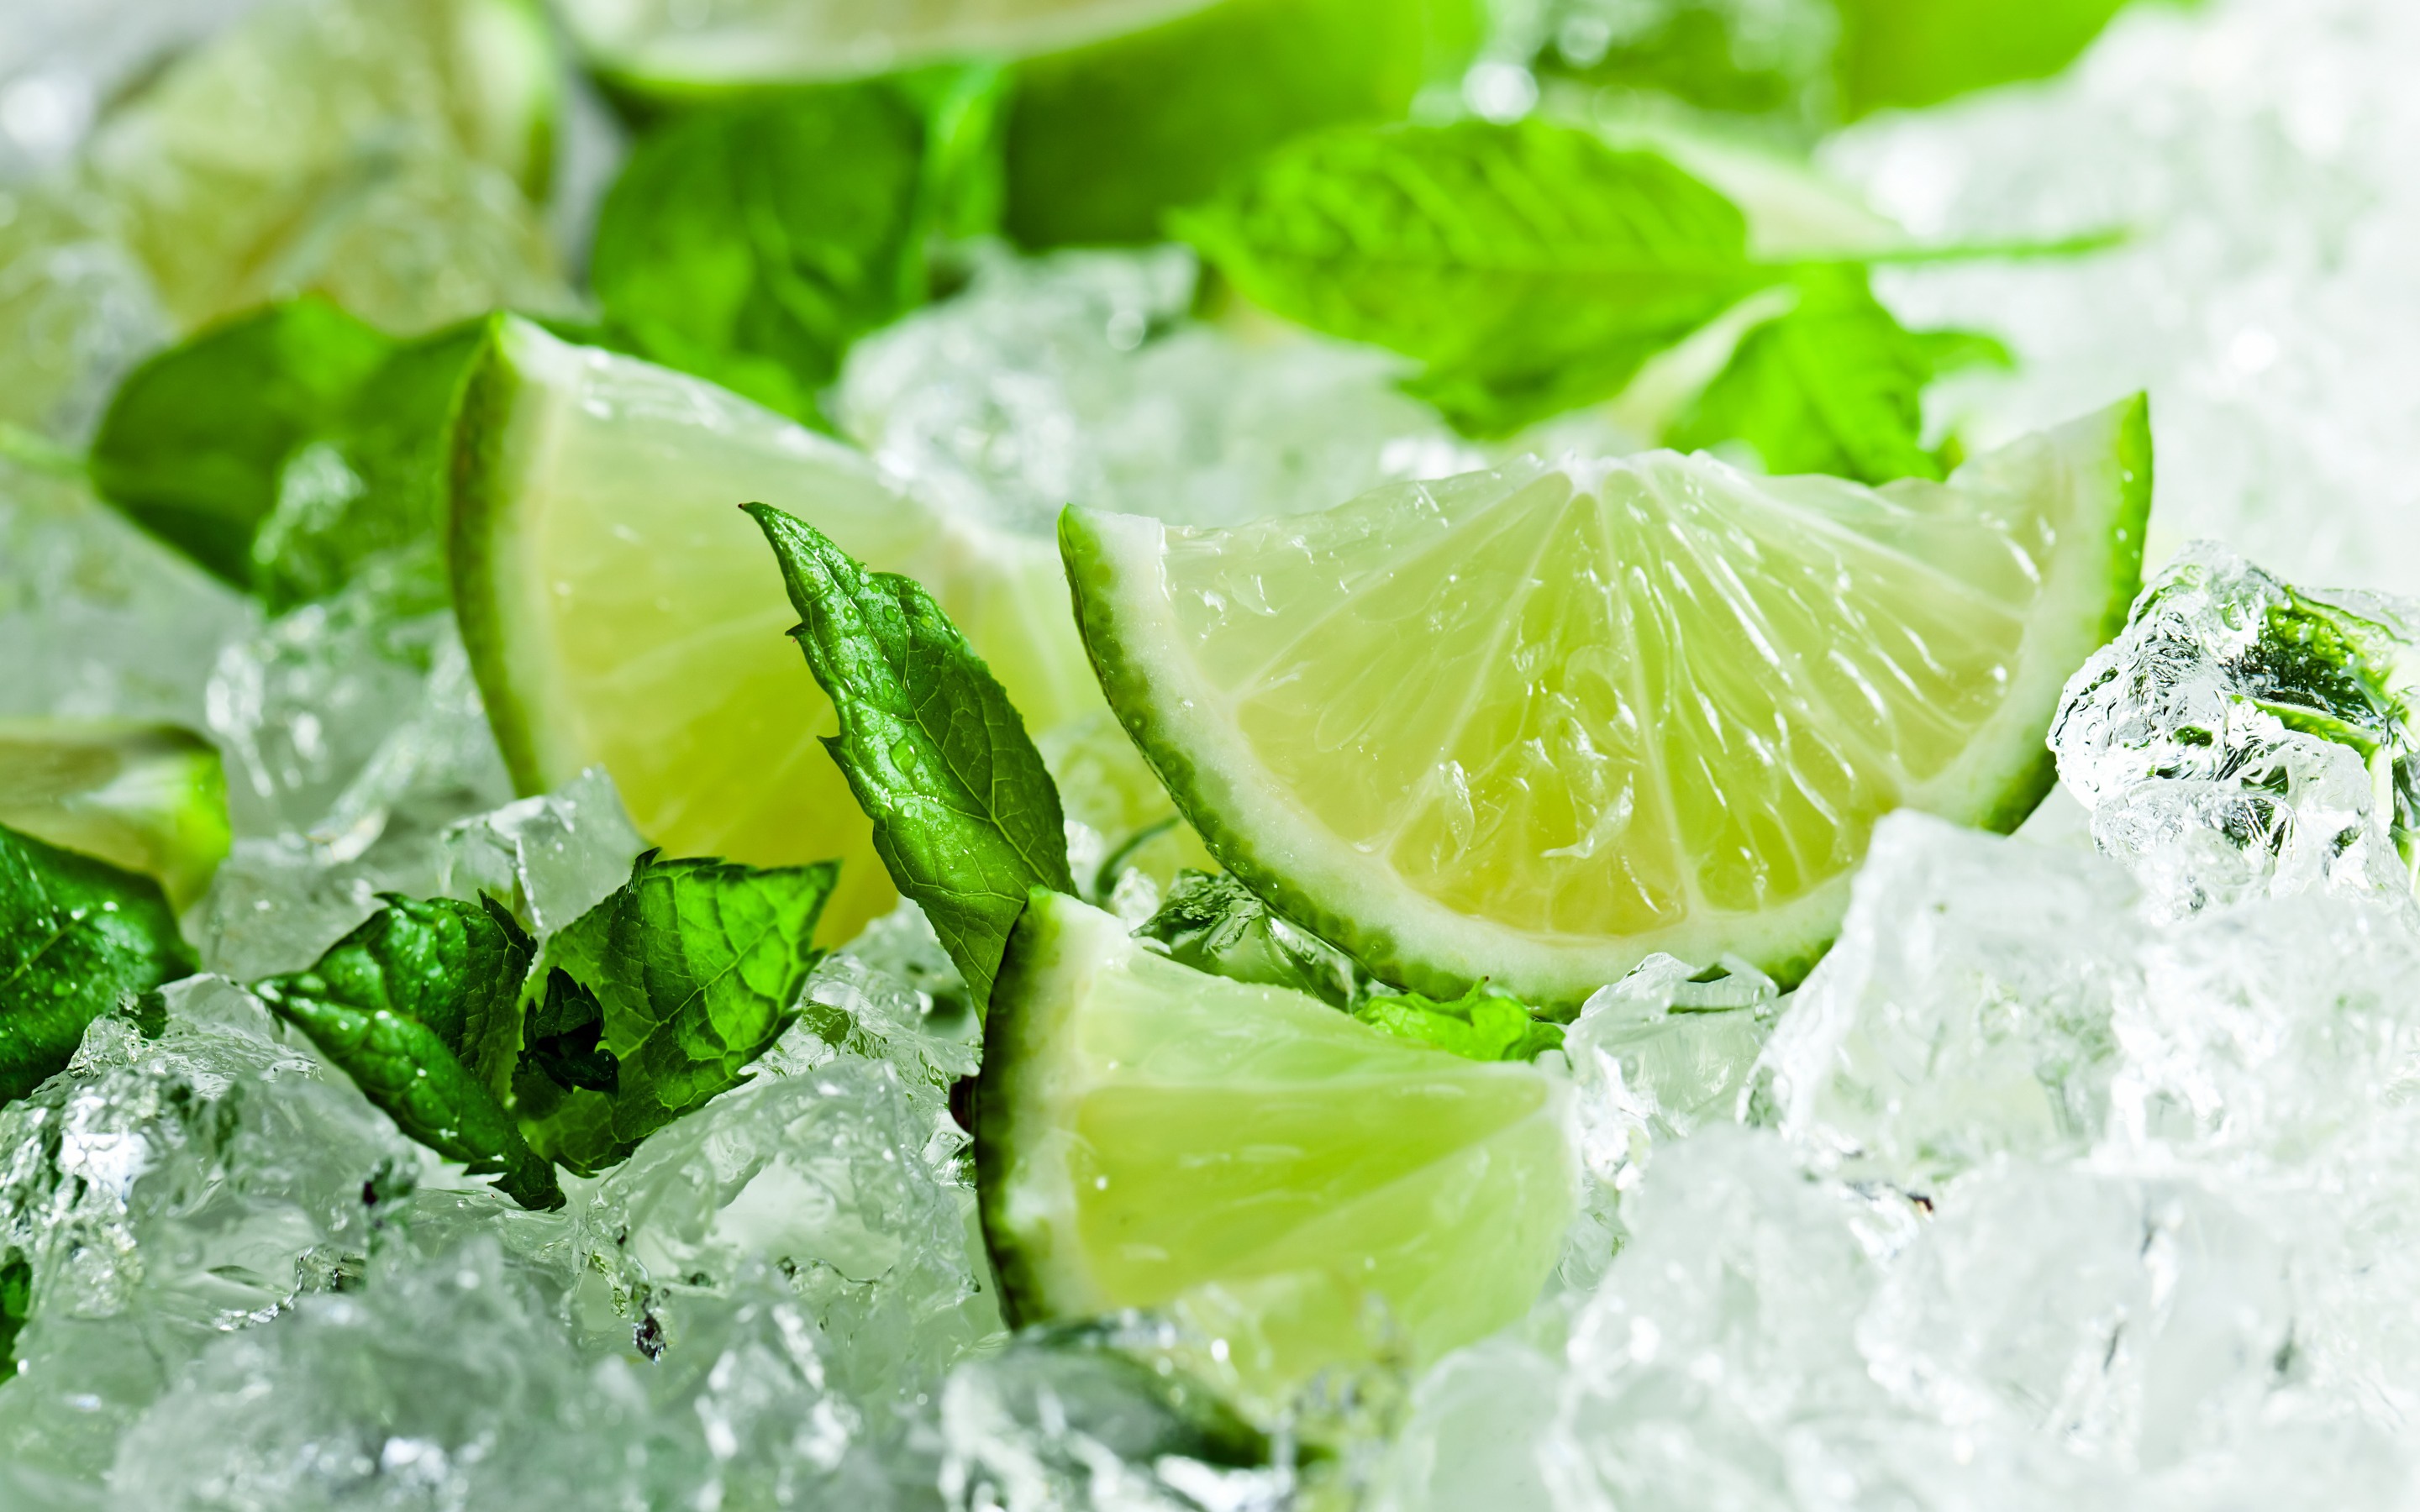 Download wallpaper lime with mint, lime on ice, green lemon, lime, freshness concepts for desktop with resolution 2880x1800. High Quality HD picture wallpaper